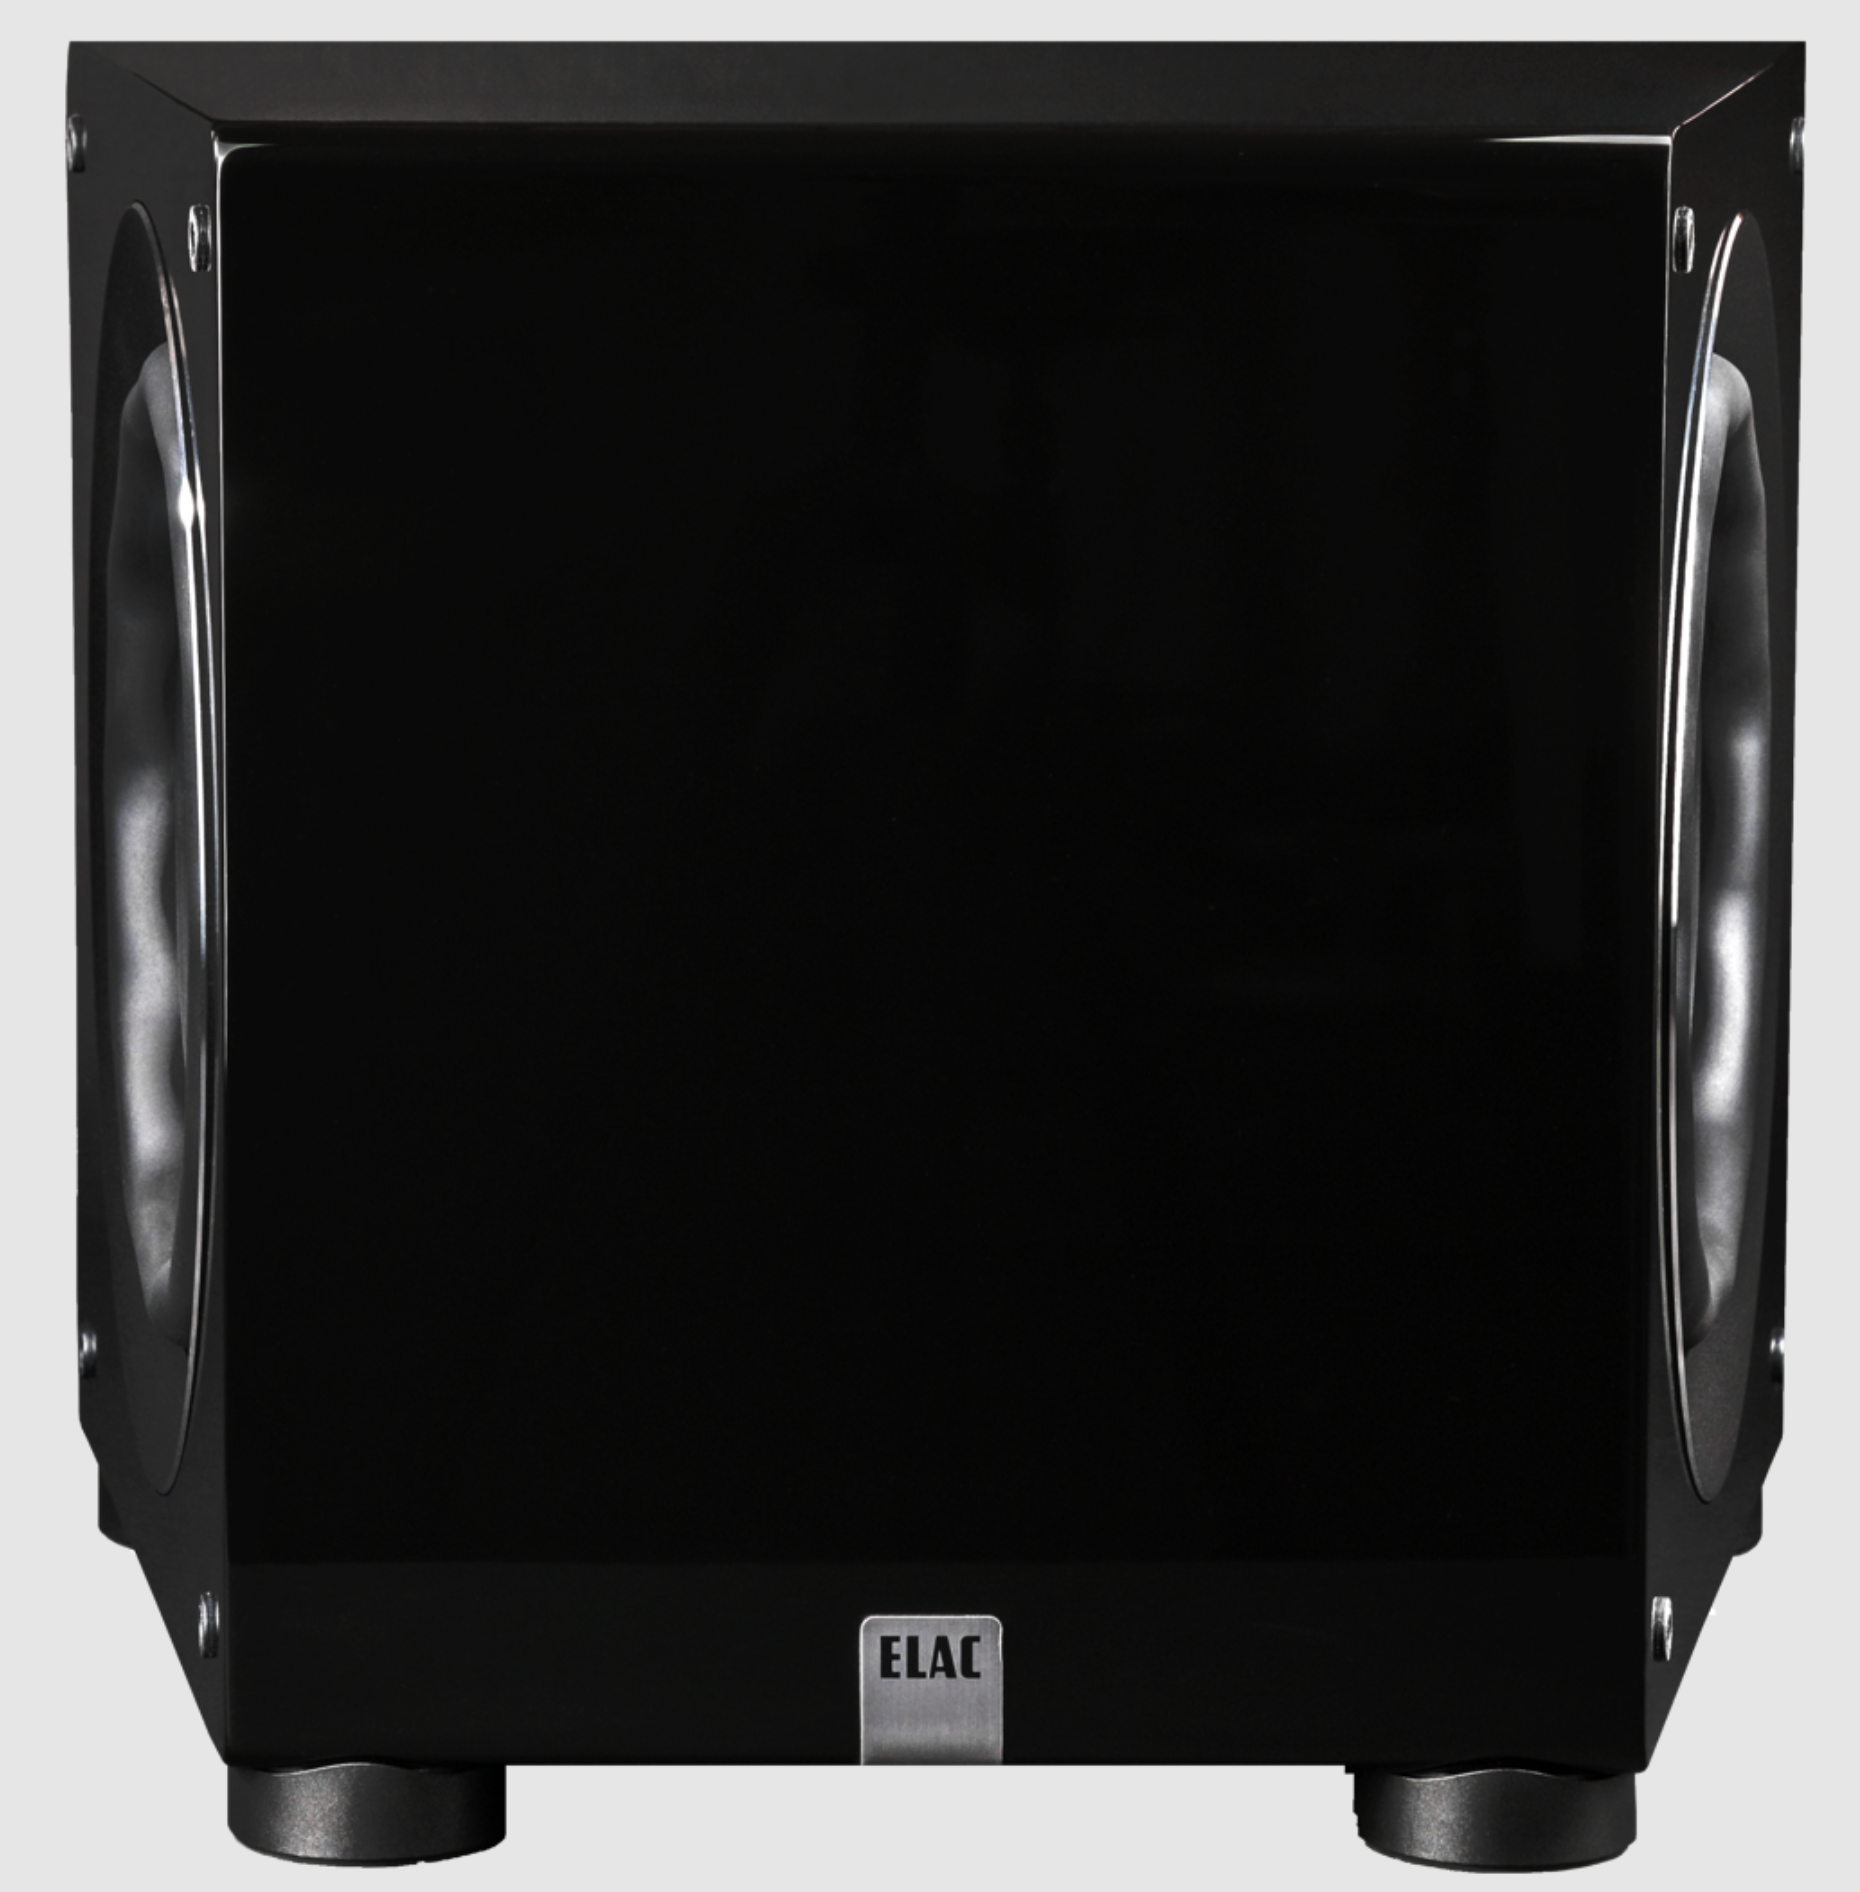 ELAC Varro DS1200 Dual Reference 12 Inch Subwoofer without grille, front image